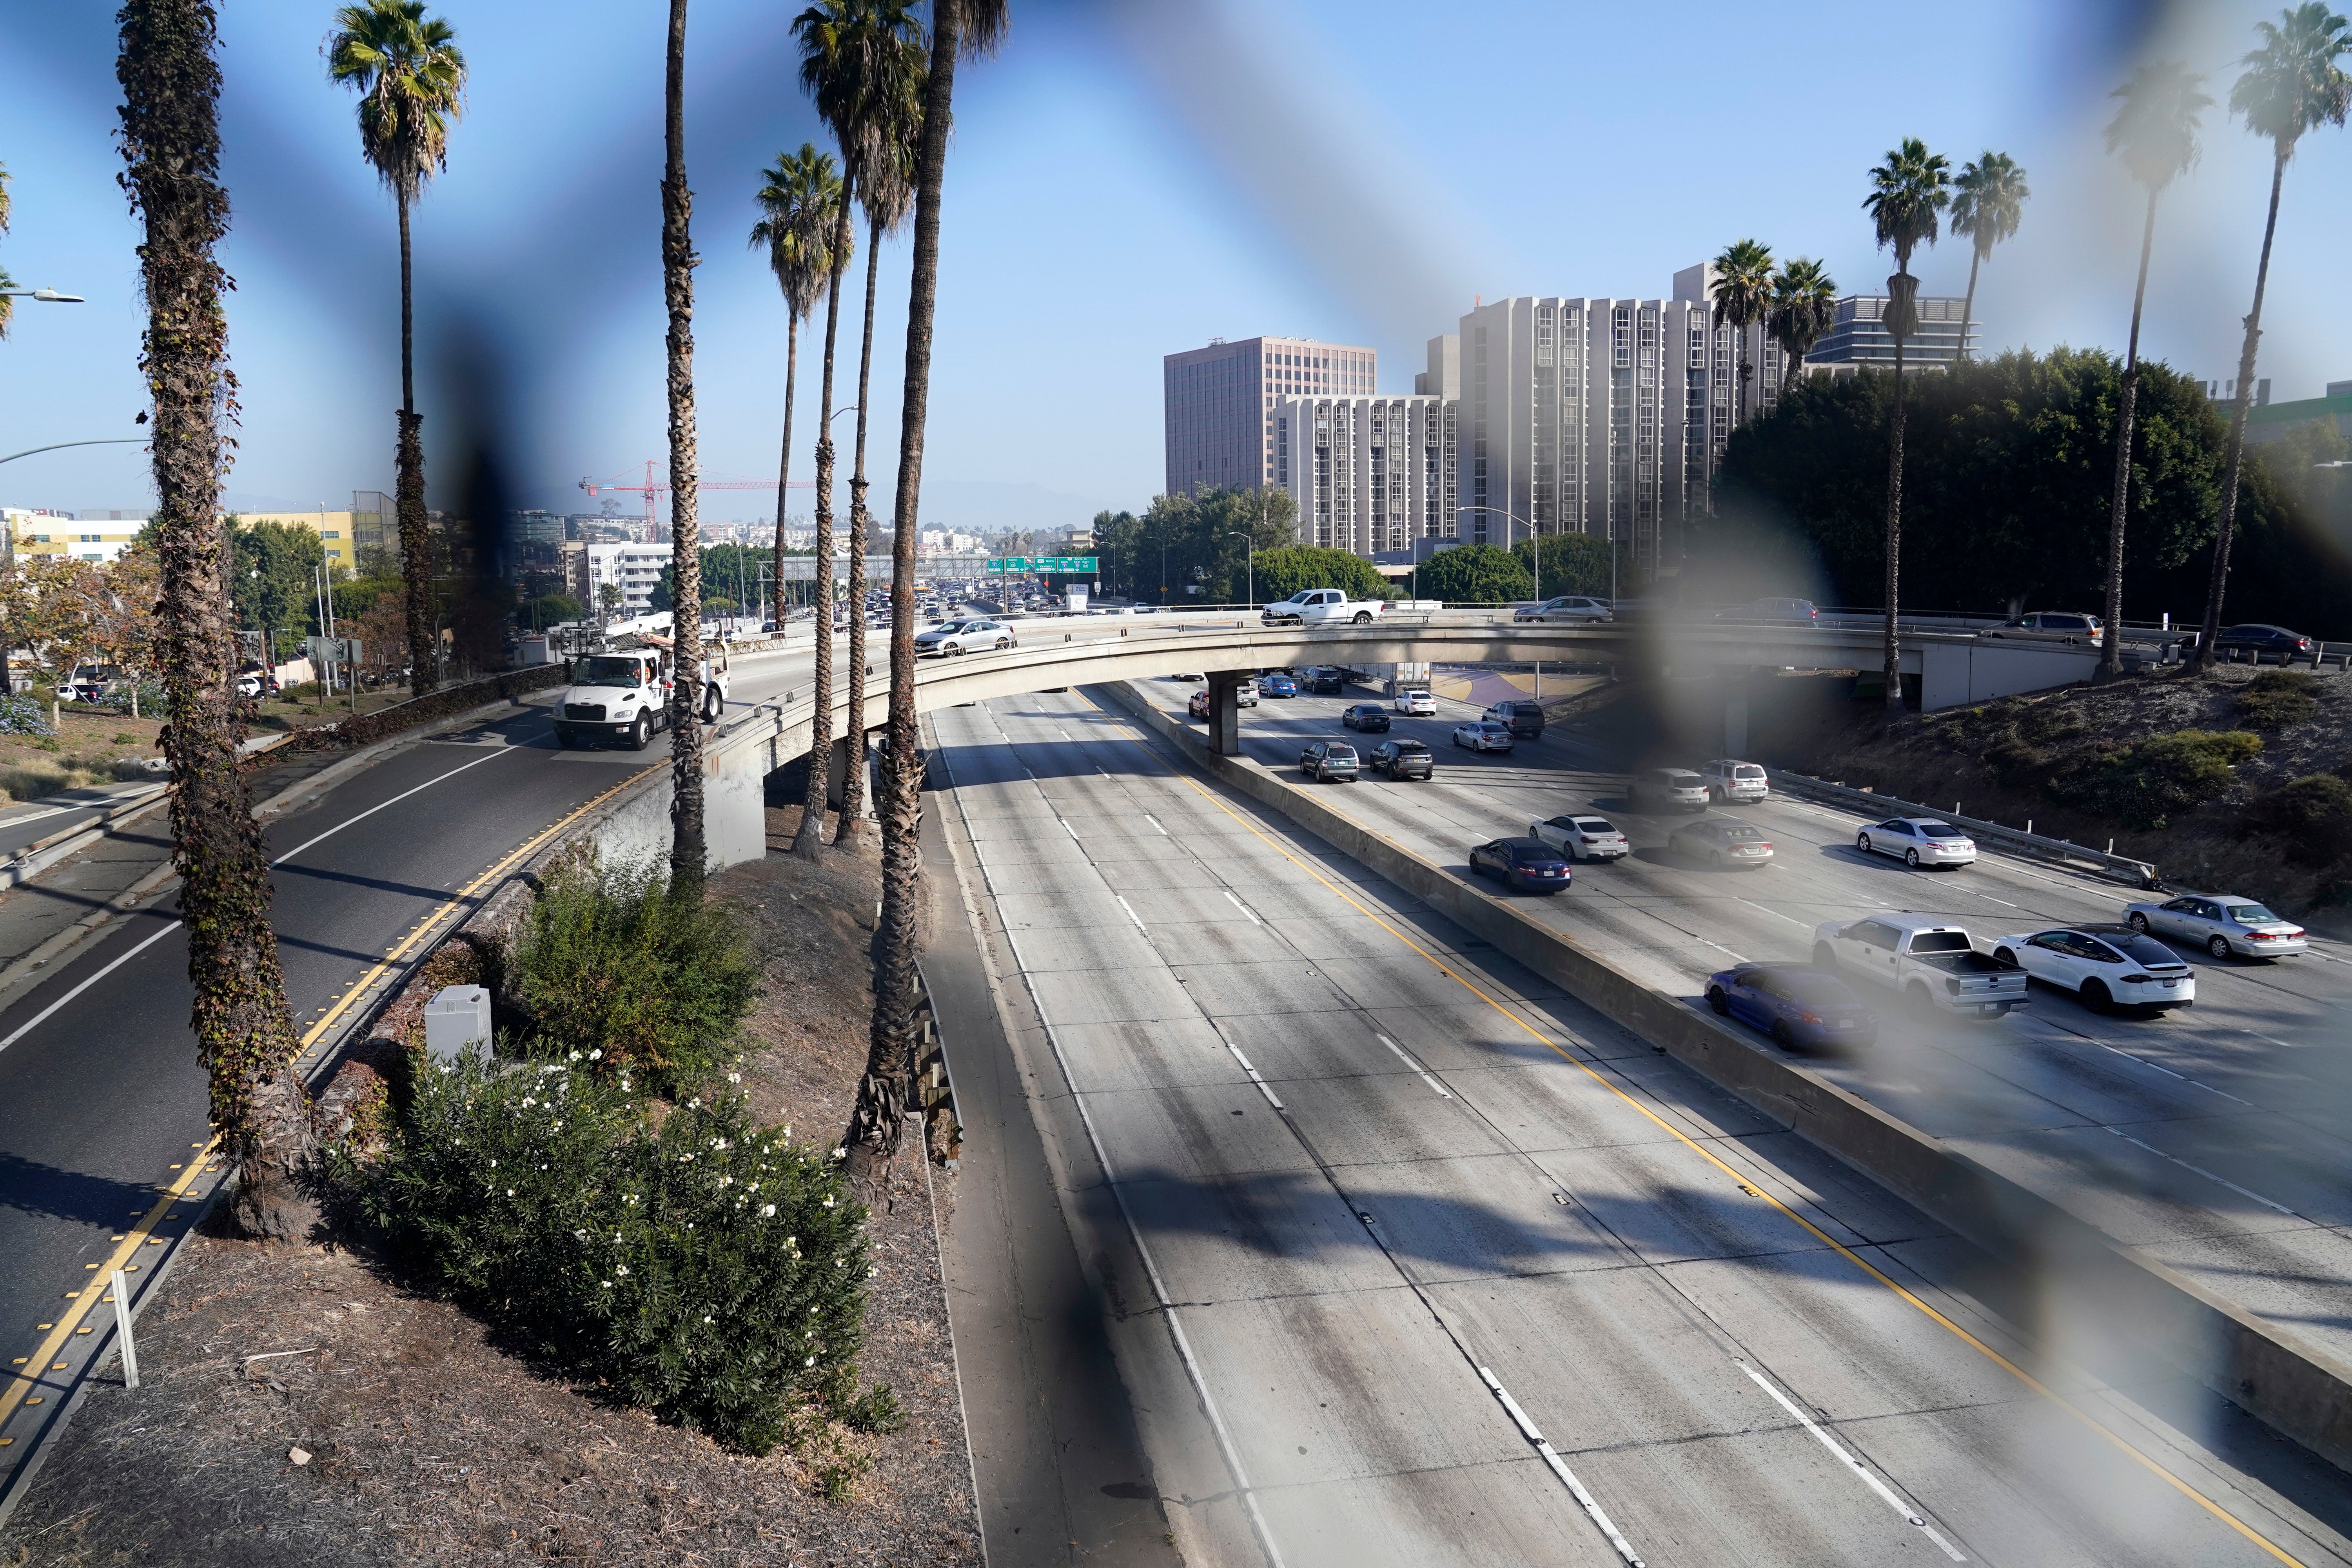 The deserted 110 Freeway in Los Angeles after Jewish protesters brought traffic to standstill